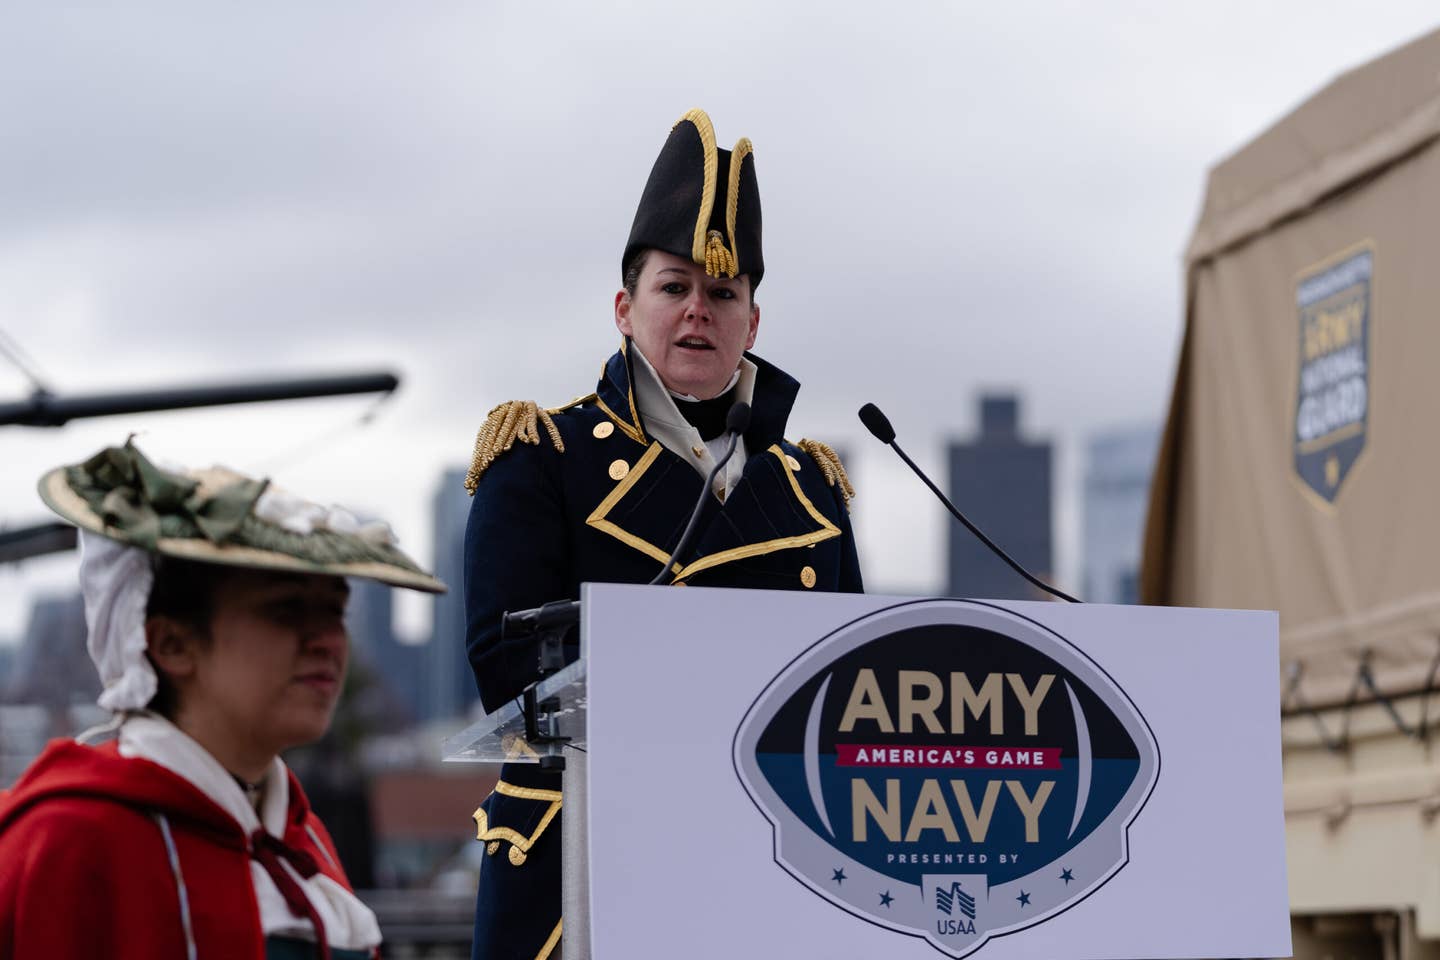 A woman speaks at a podium during the USAA Army-Navy game celebrations.